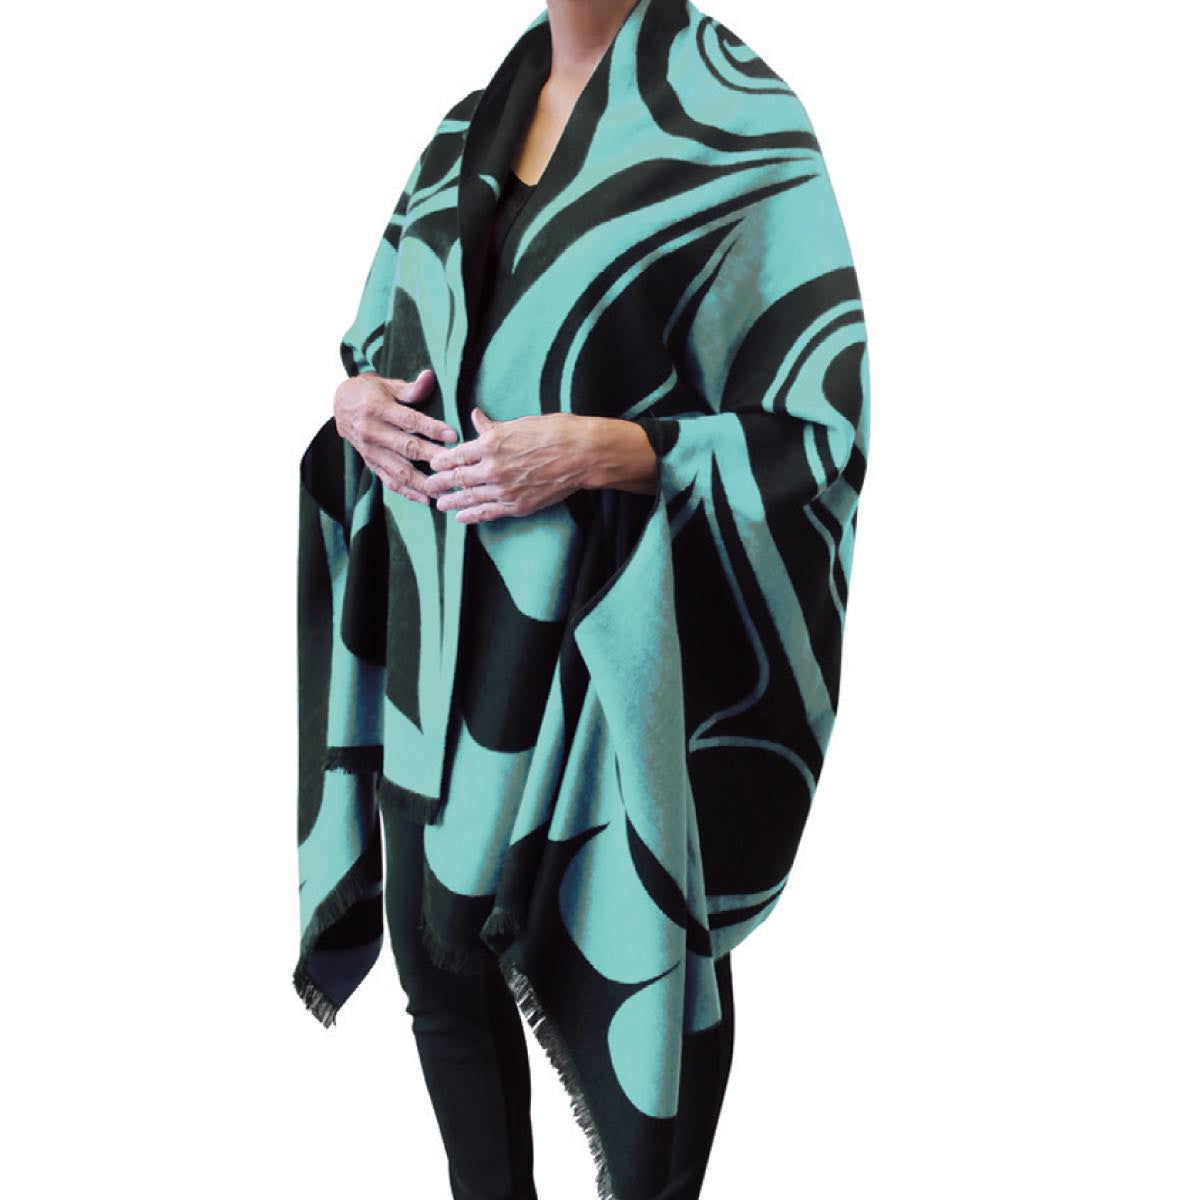 Reversible Fashion Cape - Eagle by Roger Smith (Mint)